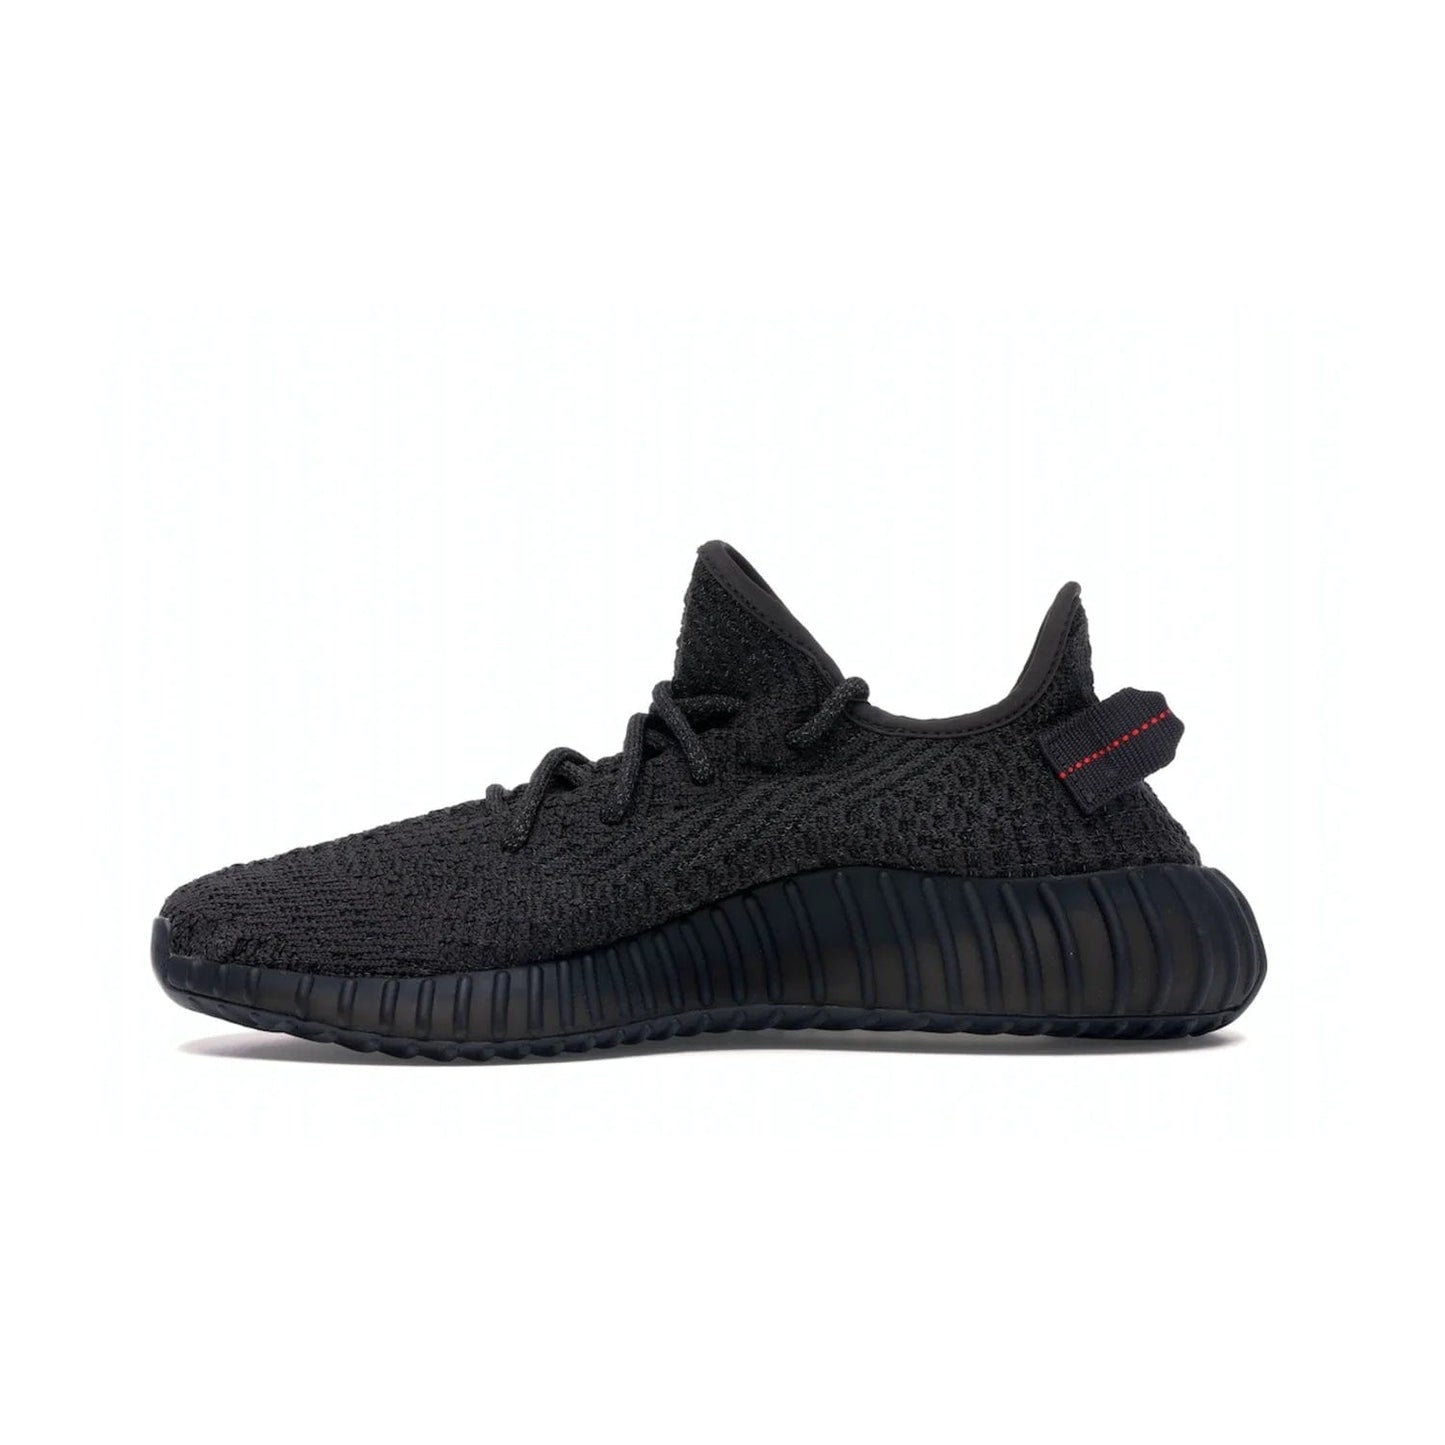 adidas Yeezy Boost 350 V2 Static Black (Reflective) - Image 19 - Only at www.BallersClubKickz.com - Make a statement with the adidas Yeezy Boost 350 V2 Static Black Reflective. All-black upper, reflective accents, midsole, and sole combine for a stylish look. High quality materials. June 2019 release. Add to your collection today.